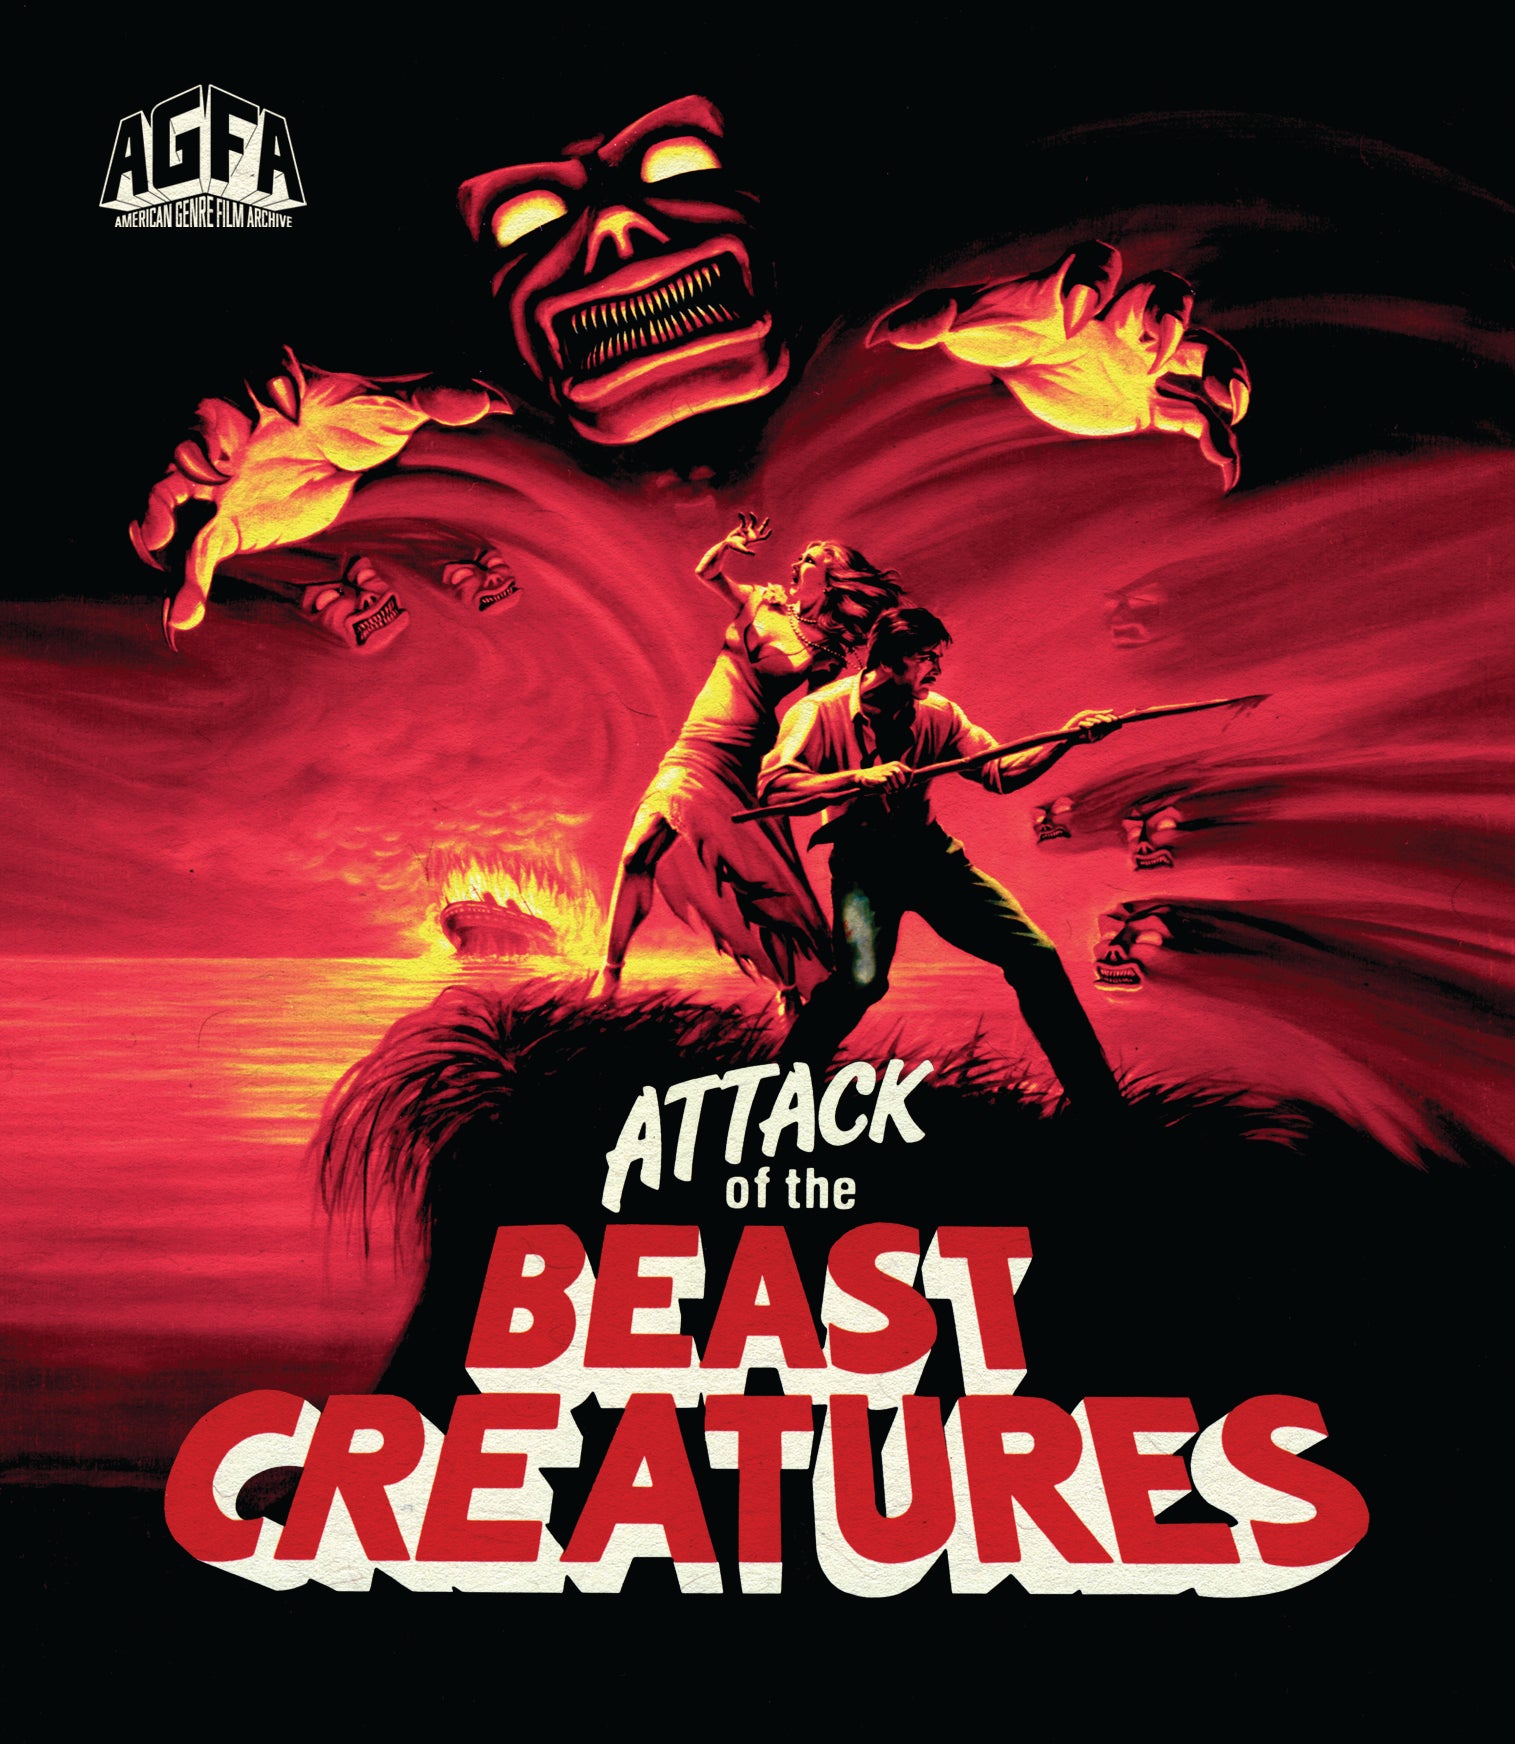 ATTACK OF THE BEAST CREATURES BLU-RAY